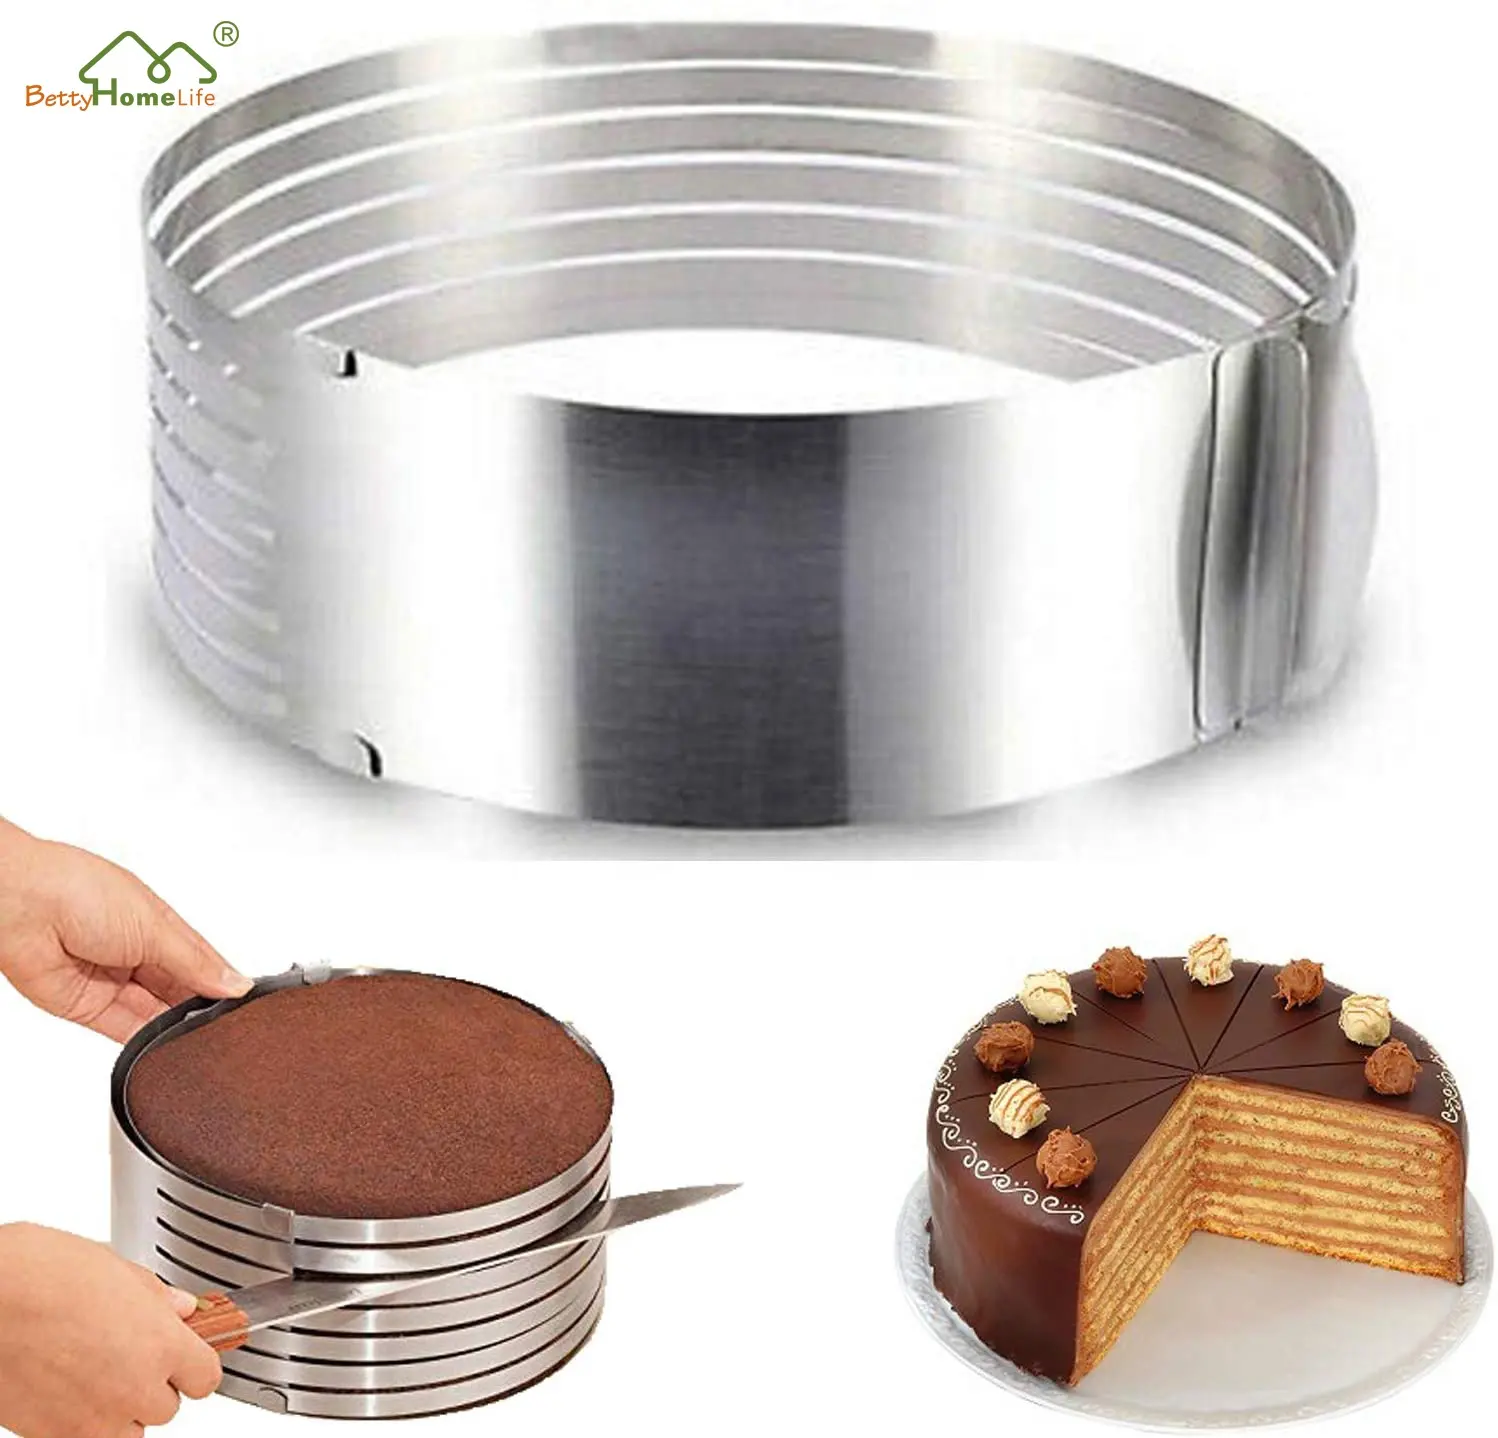 Stainless Steel Adjustable 7 Layer Round Bread Cake Decorating Mousse Ring Pastry Tools Cake Slicer Cutter Mold